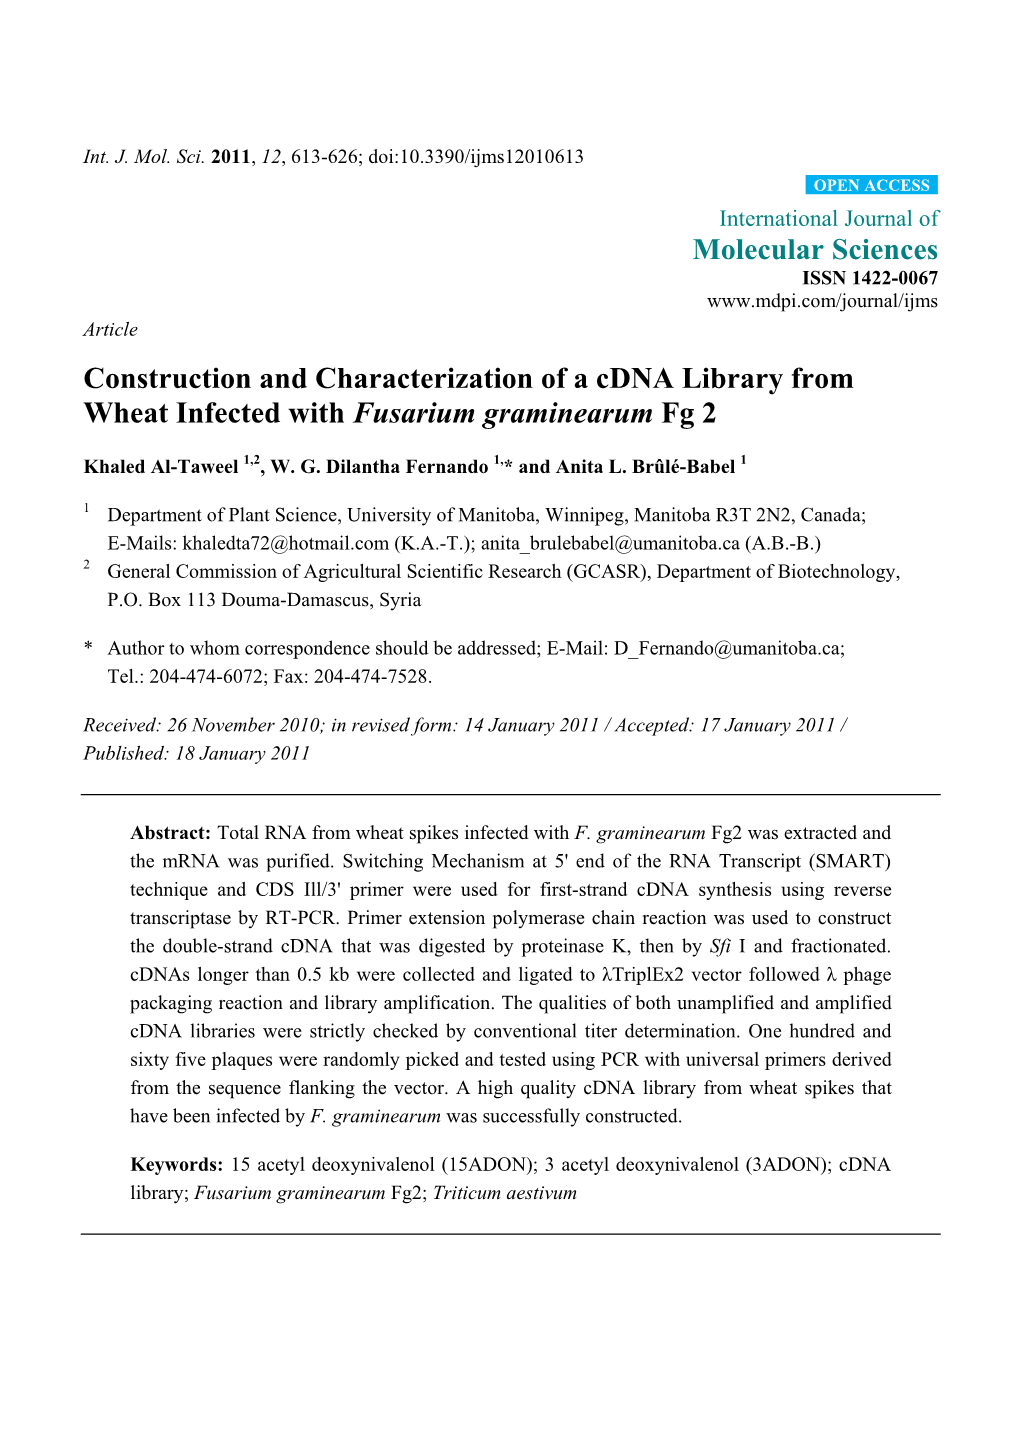 Construction and Characterization of a Cdna Library from Wheat Infected with Fusarium Graminearum Fg 2